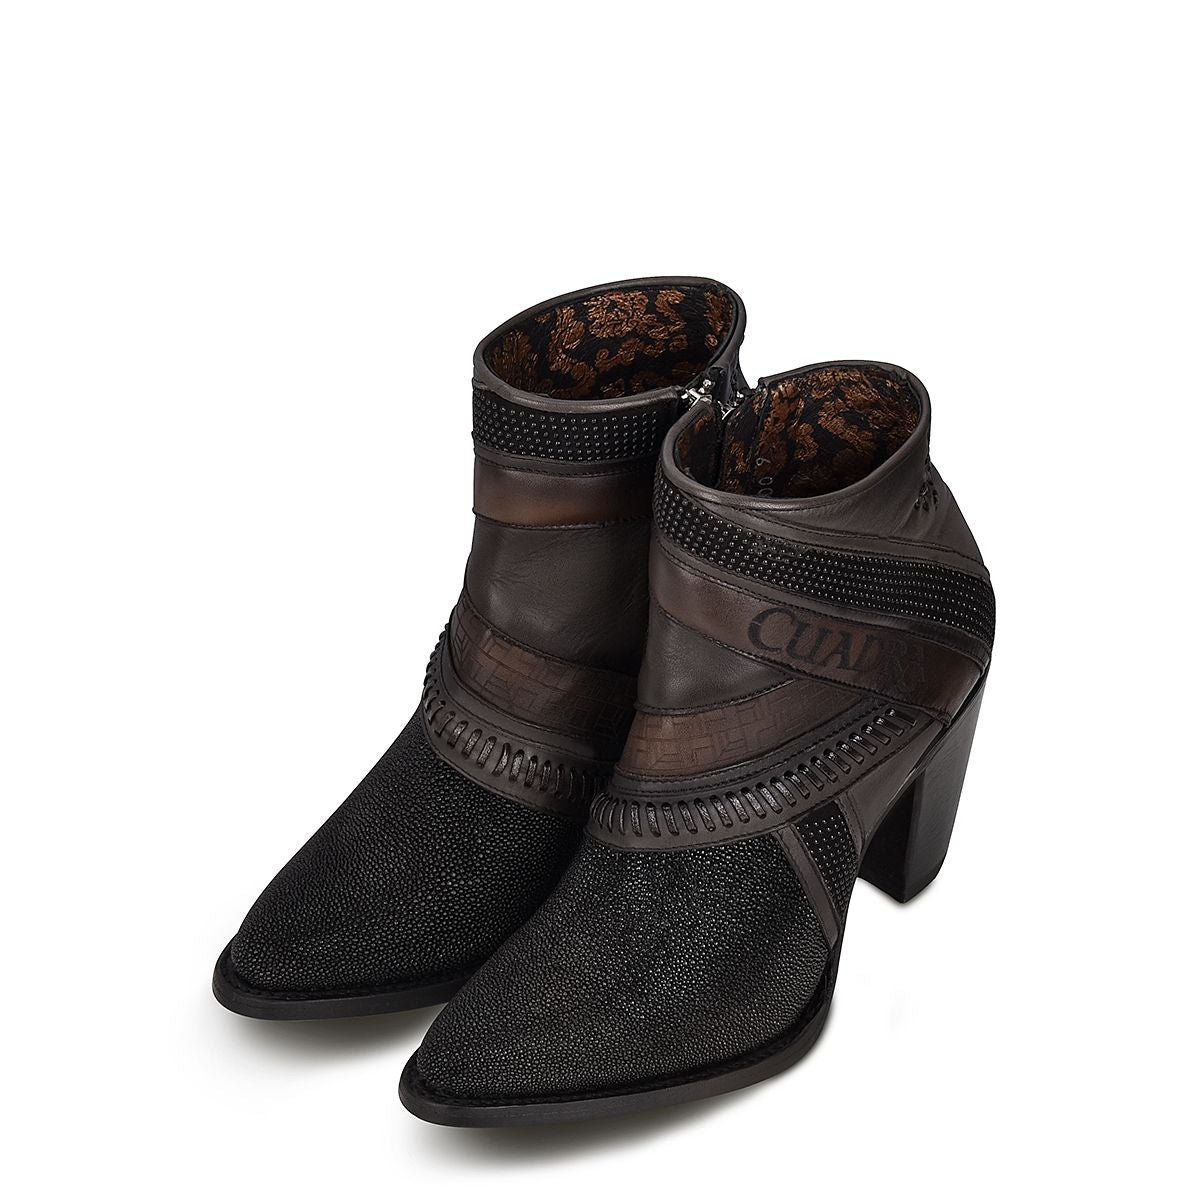 3F86MA- Cuadra black casual stingray leather ankle boots for women-Kuet.us